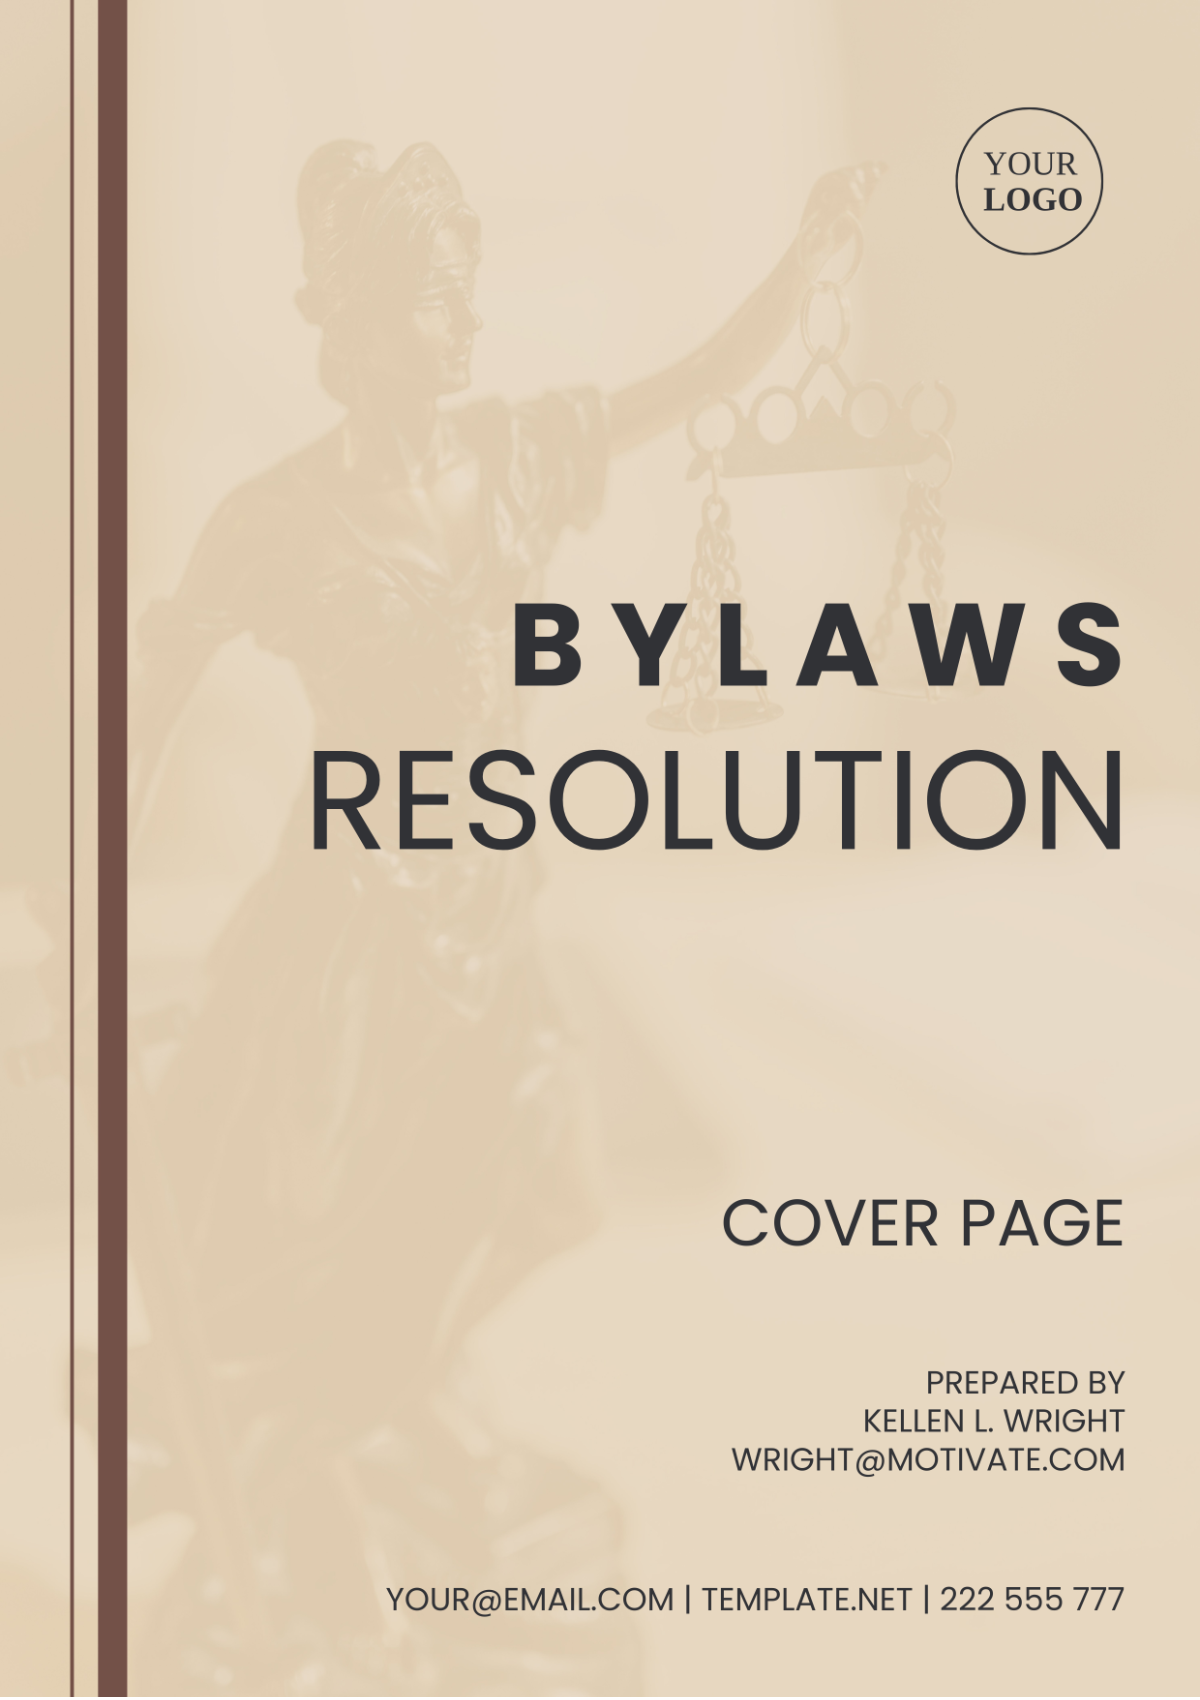 Bylaws Resolution Template